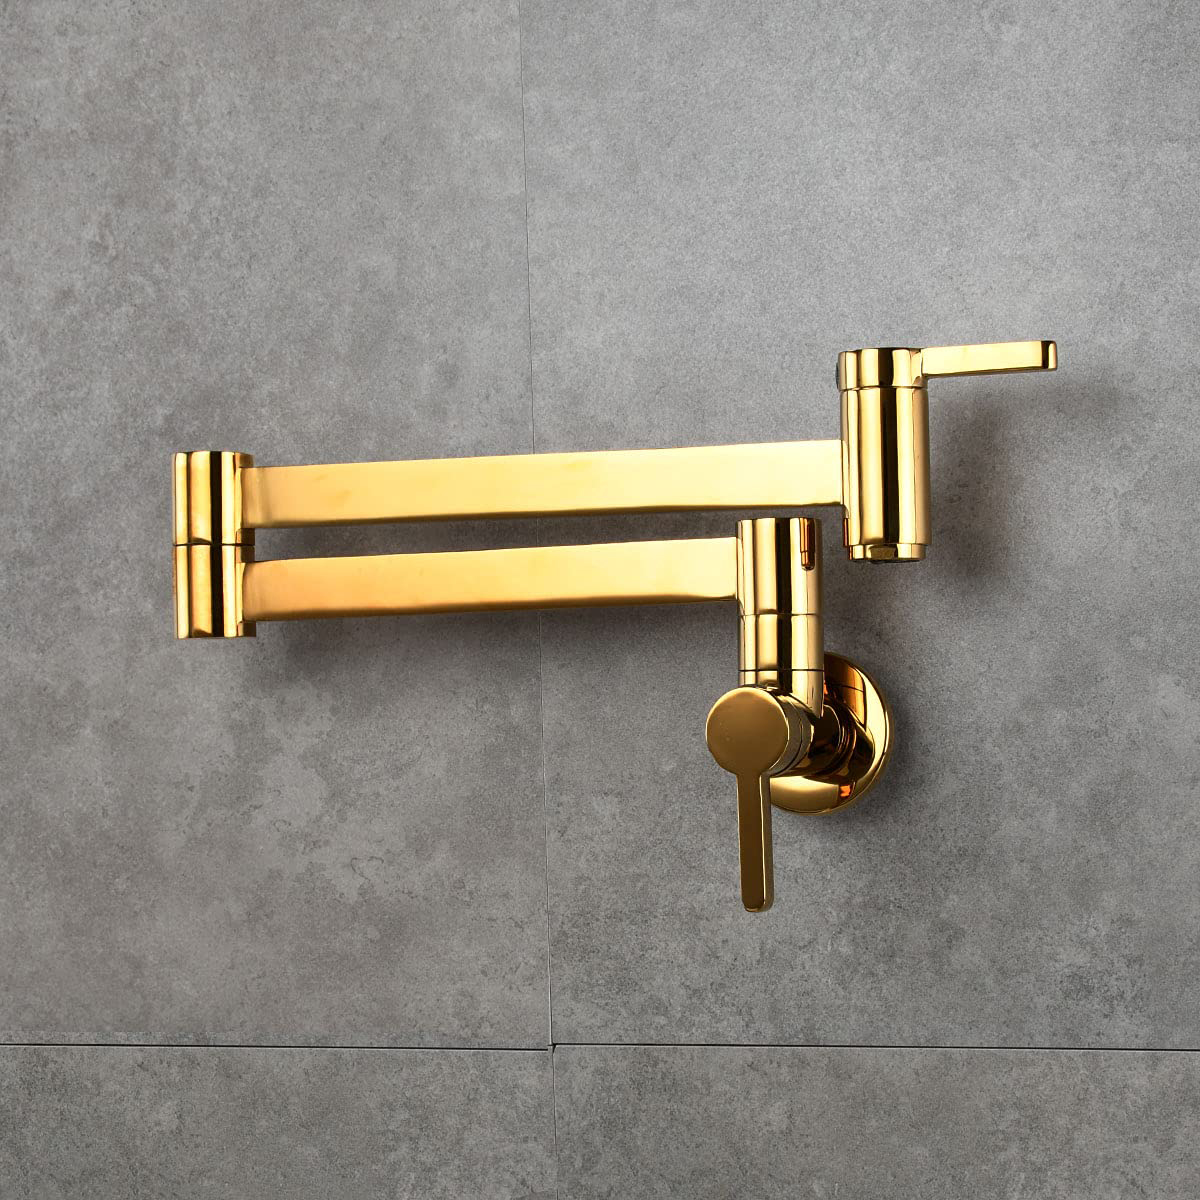 Solid Brass Square Wall Mounted Folding Faucet Titanium Gold Double Switch Foldable Kitchen Sink Pot Filler Faucet 